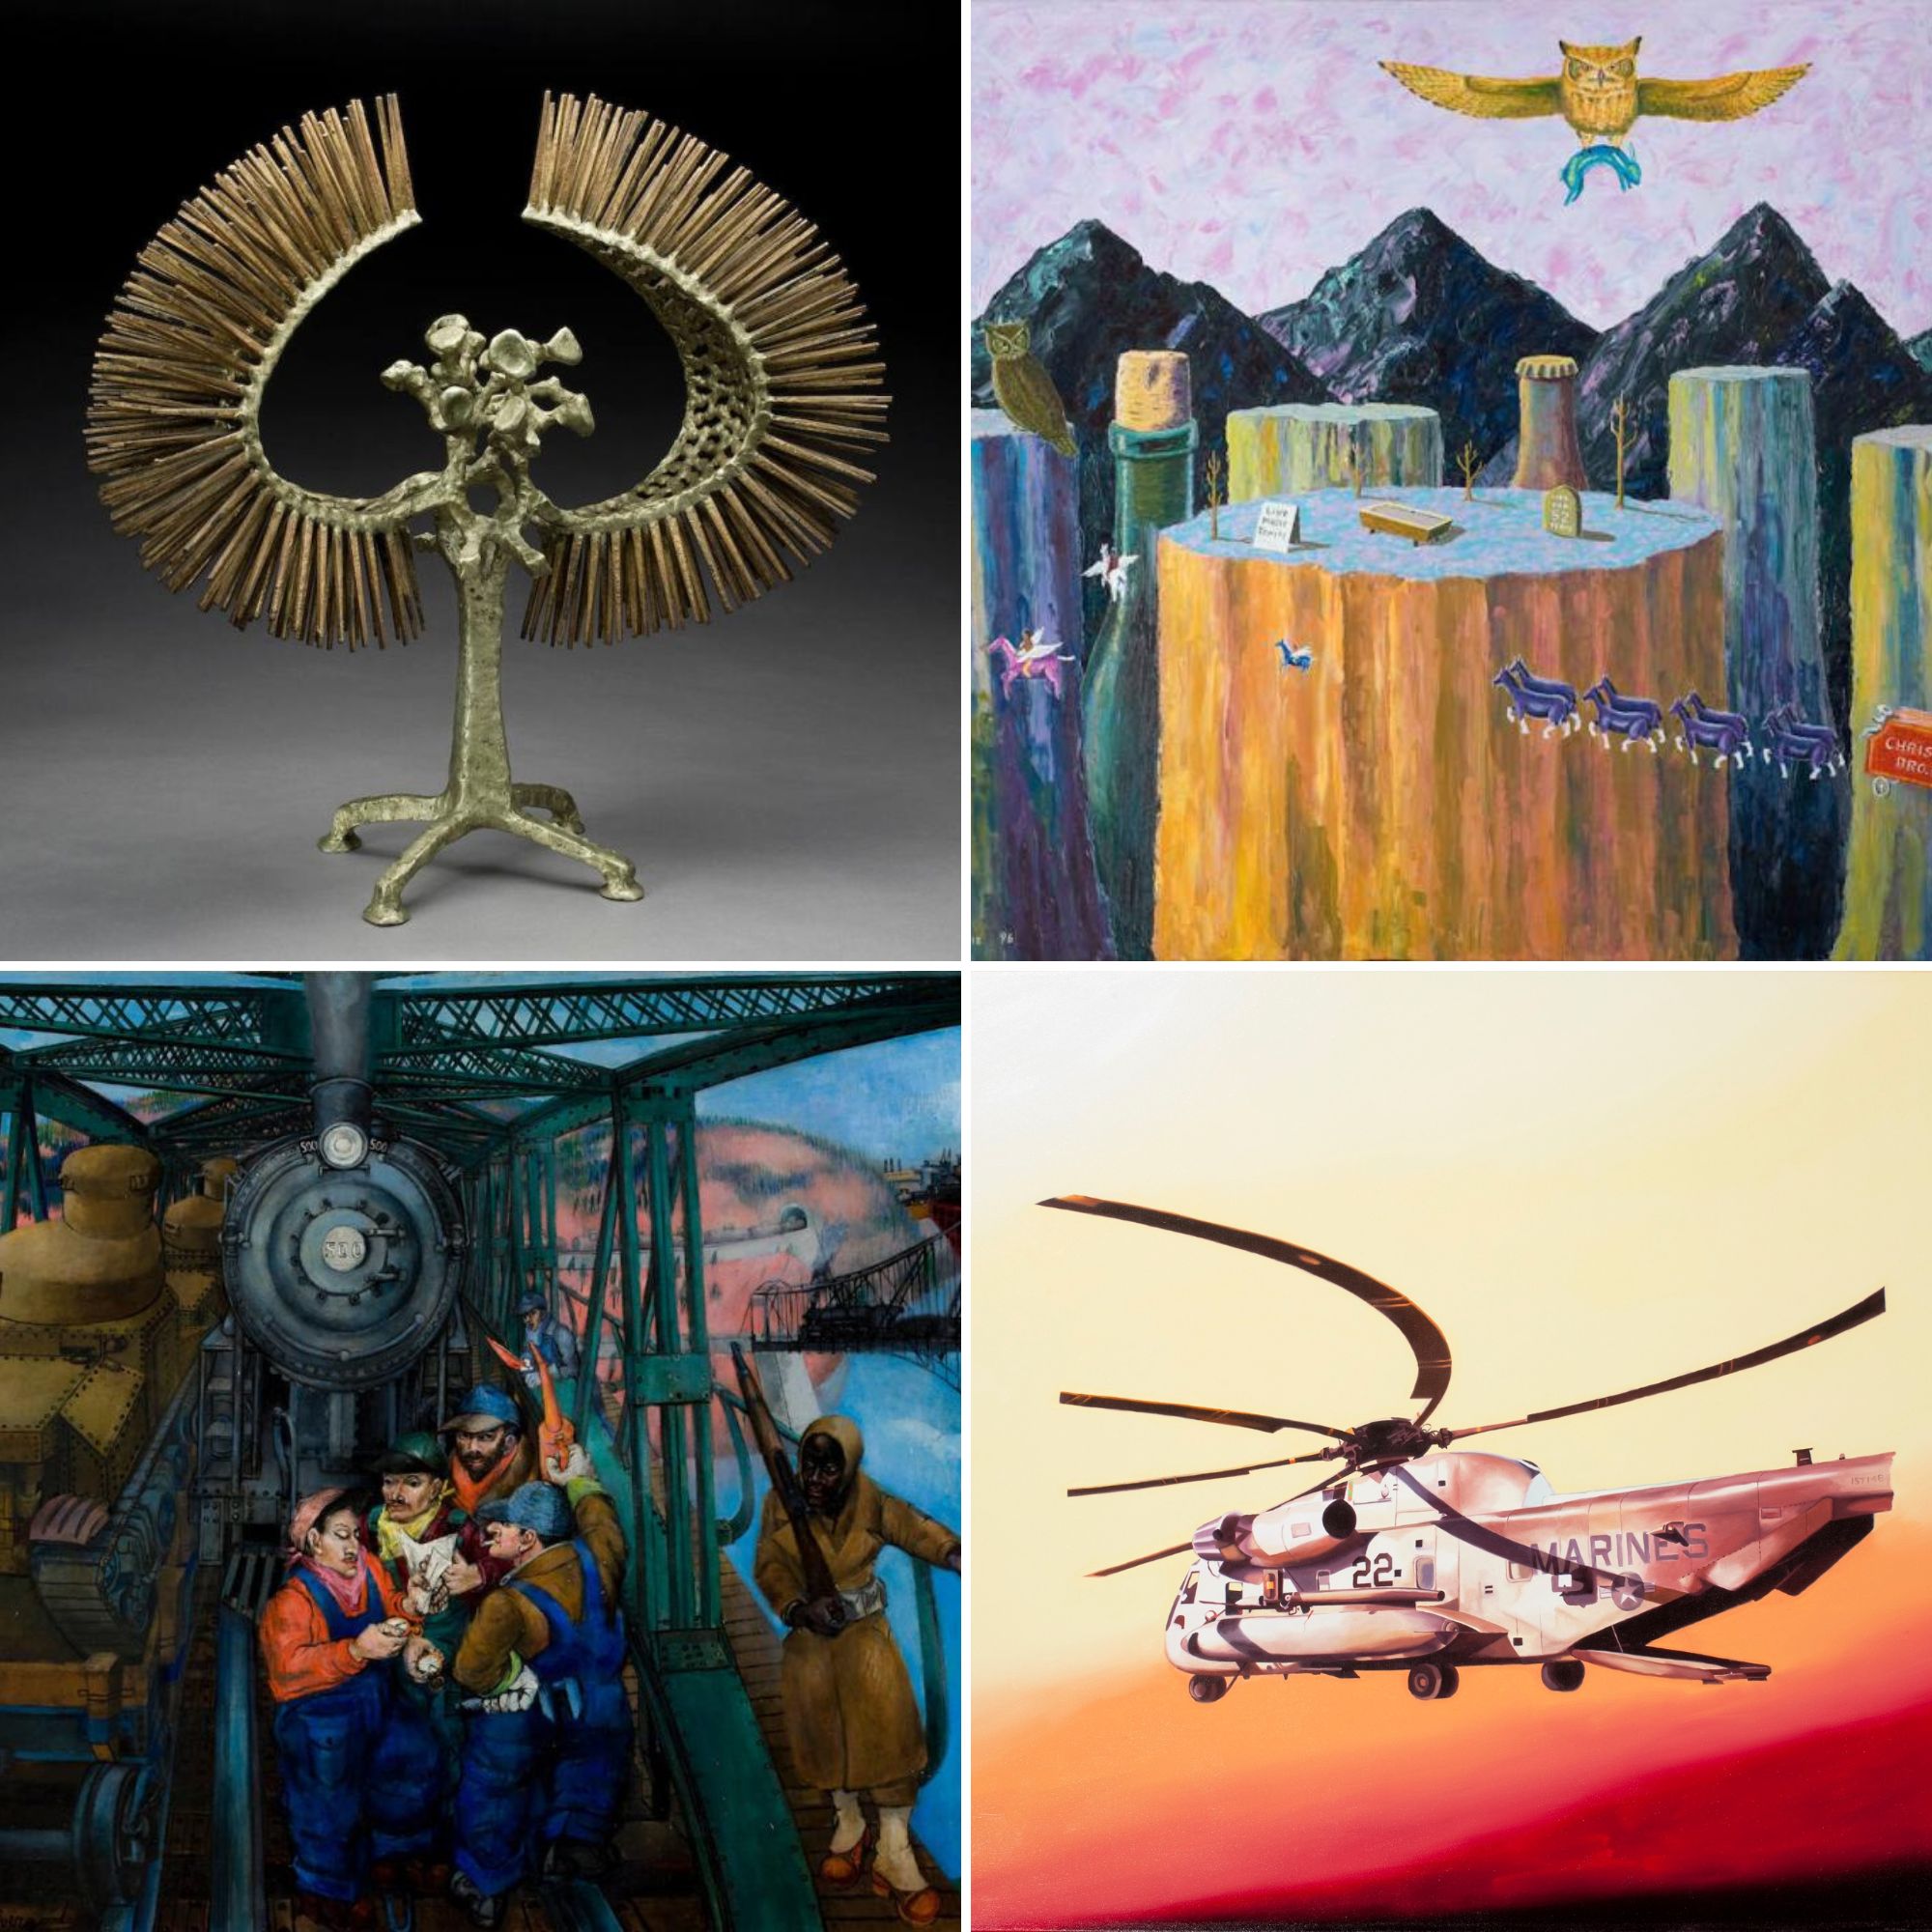 scultpure (top left), imaginative painting of flying creatures (top right), painting of railroad workers (bottom left), painting of a helecopter (bottom right)